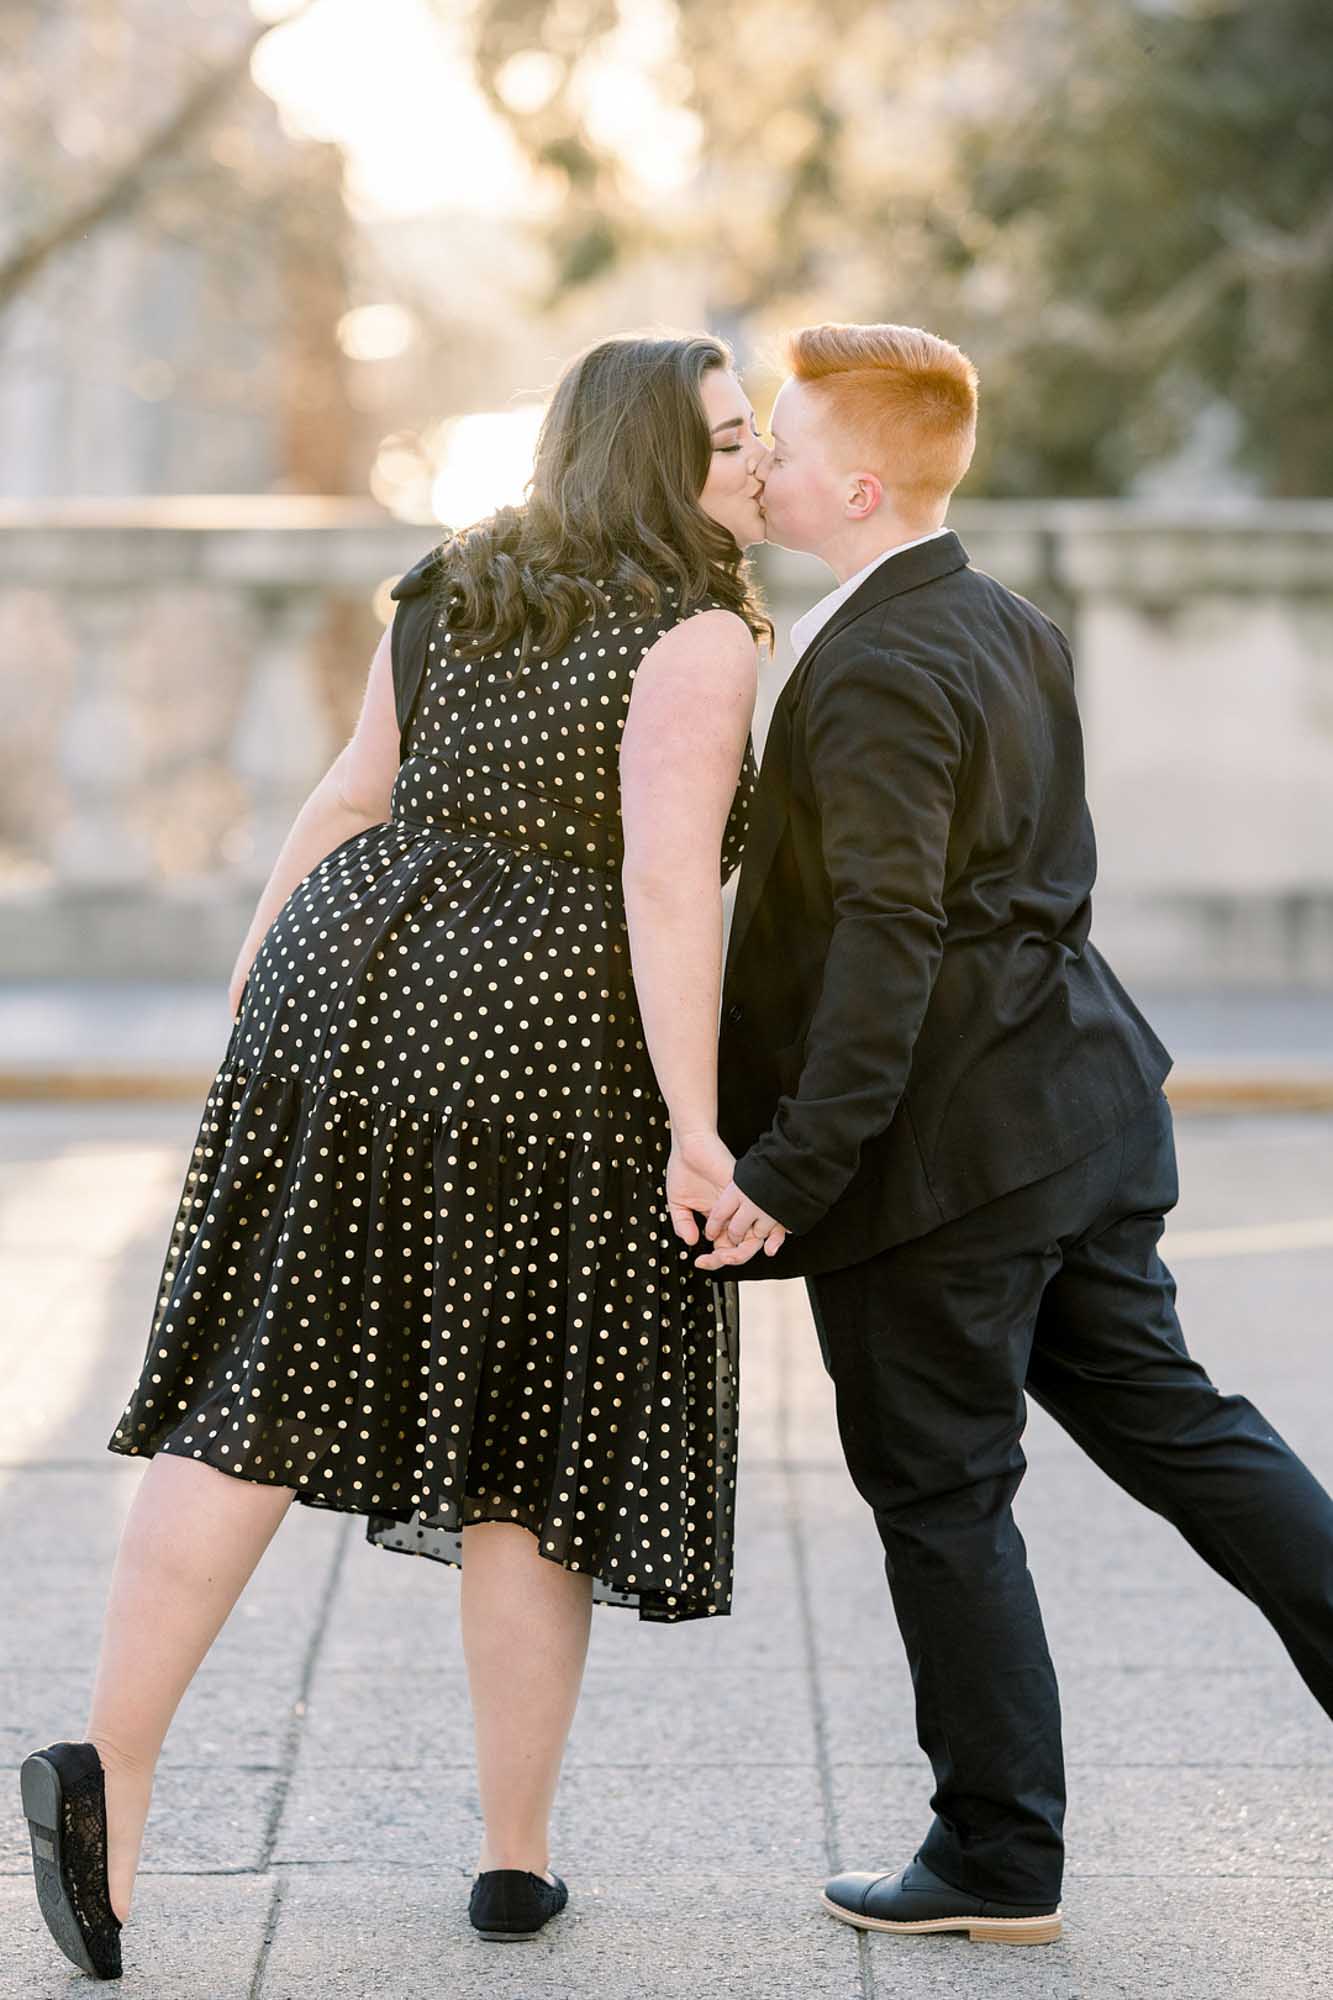 Bright and sunny sweetheart photo session at the Pennsylvania State Capitol | Sarandon Smith Photography | Featured on Equally Wed, the leading LGBTQ+ wedding magazine